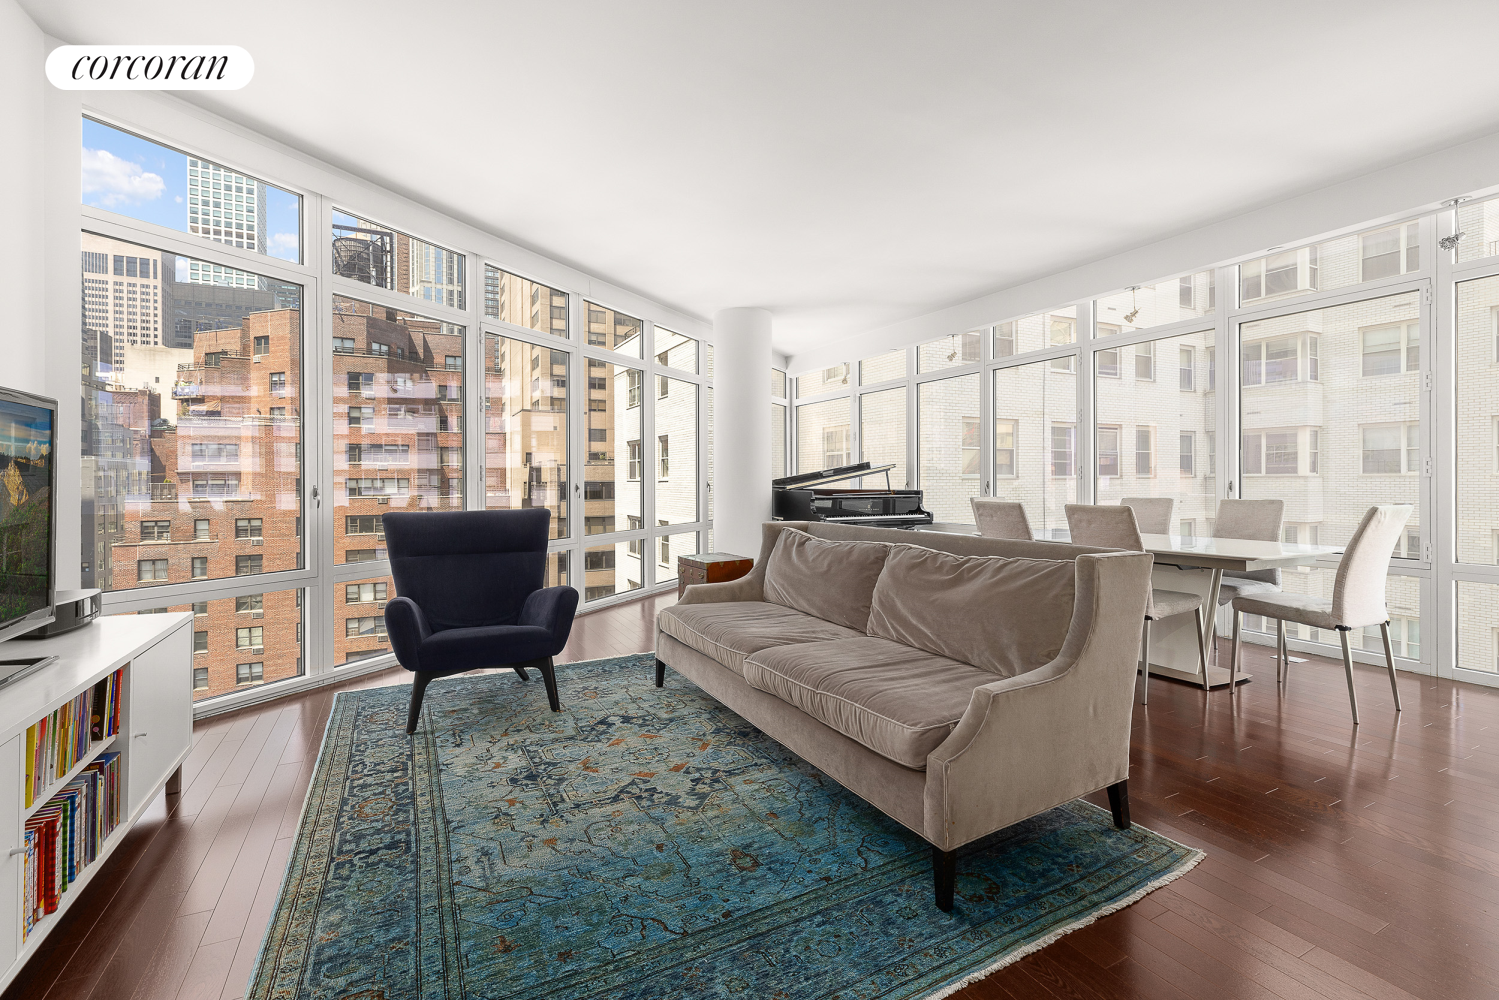 207 East 57th Street 15A, Sutton, Midtown East, NYC - 3 Bedrooms  
3 Bathrooms  
6 Rooms - 